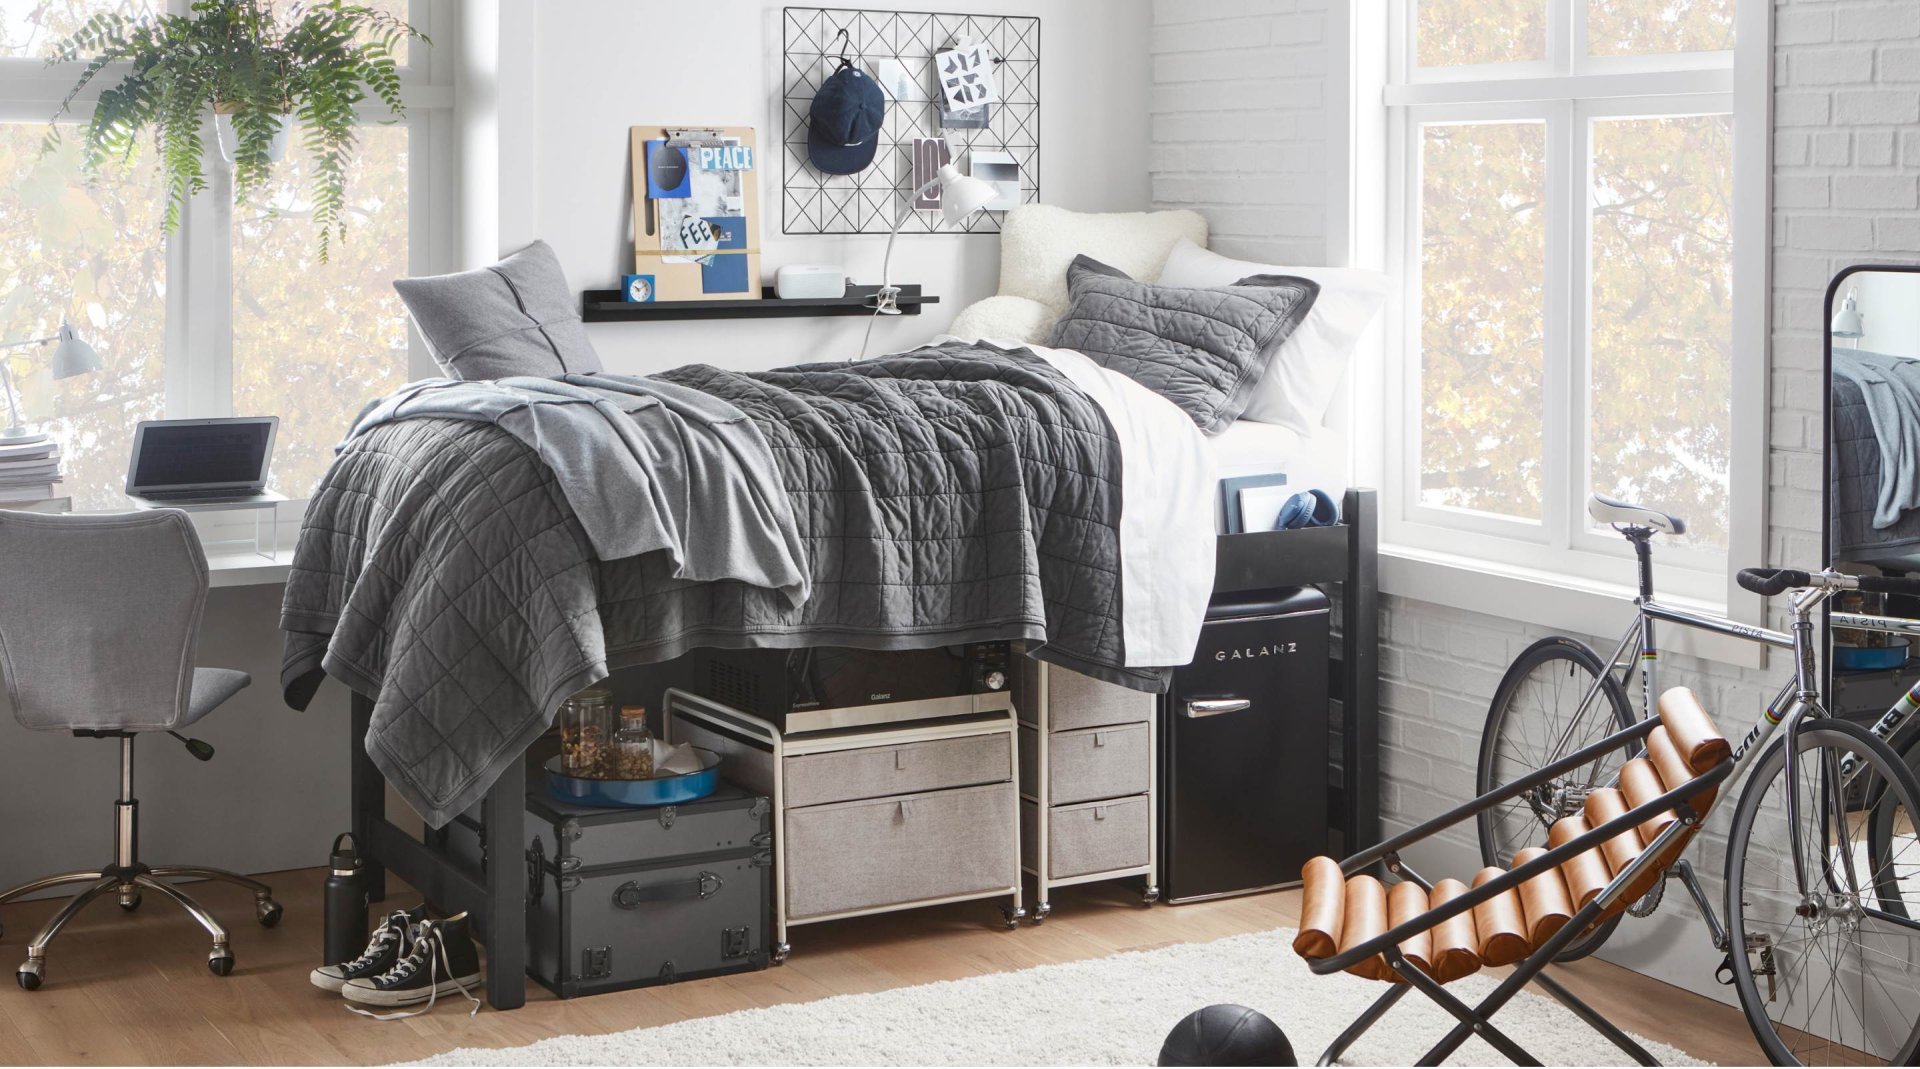 dorm room decorating and storage ideas for guys